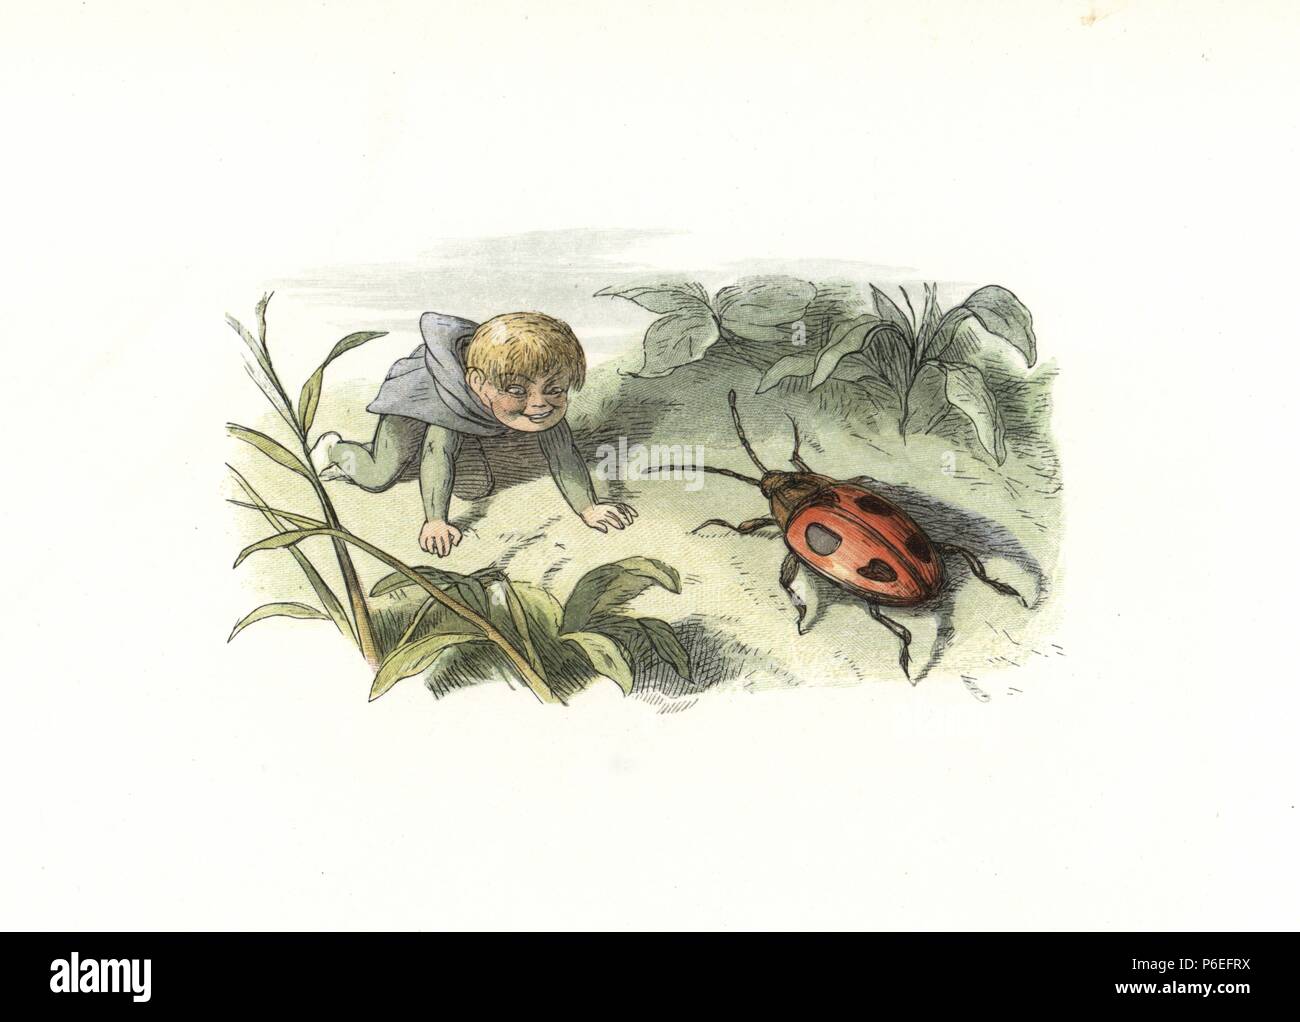 An elf surprising a beetle. Handcoloured woodblock print by Edmund Evans after an illustration by Richard Doyle from In Fairyland, a series of Pictures from the Elf World, Longman, London, 1870. Stock Photo